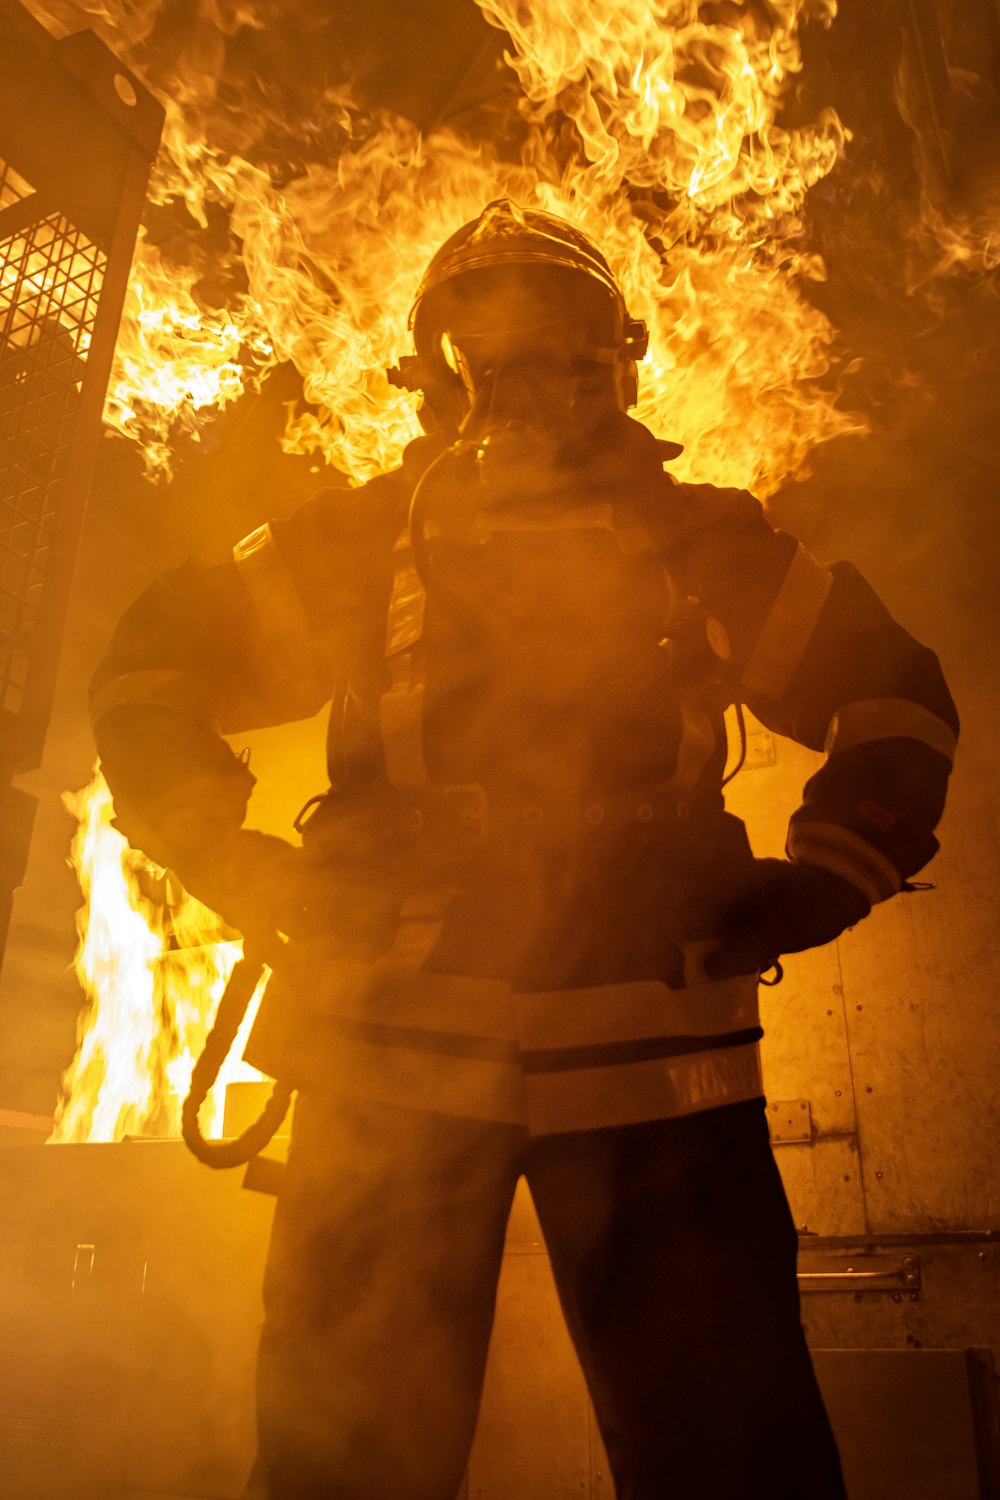 a firefighter standing in front of a large fire